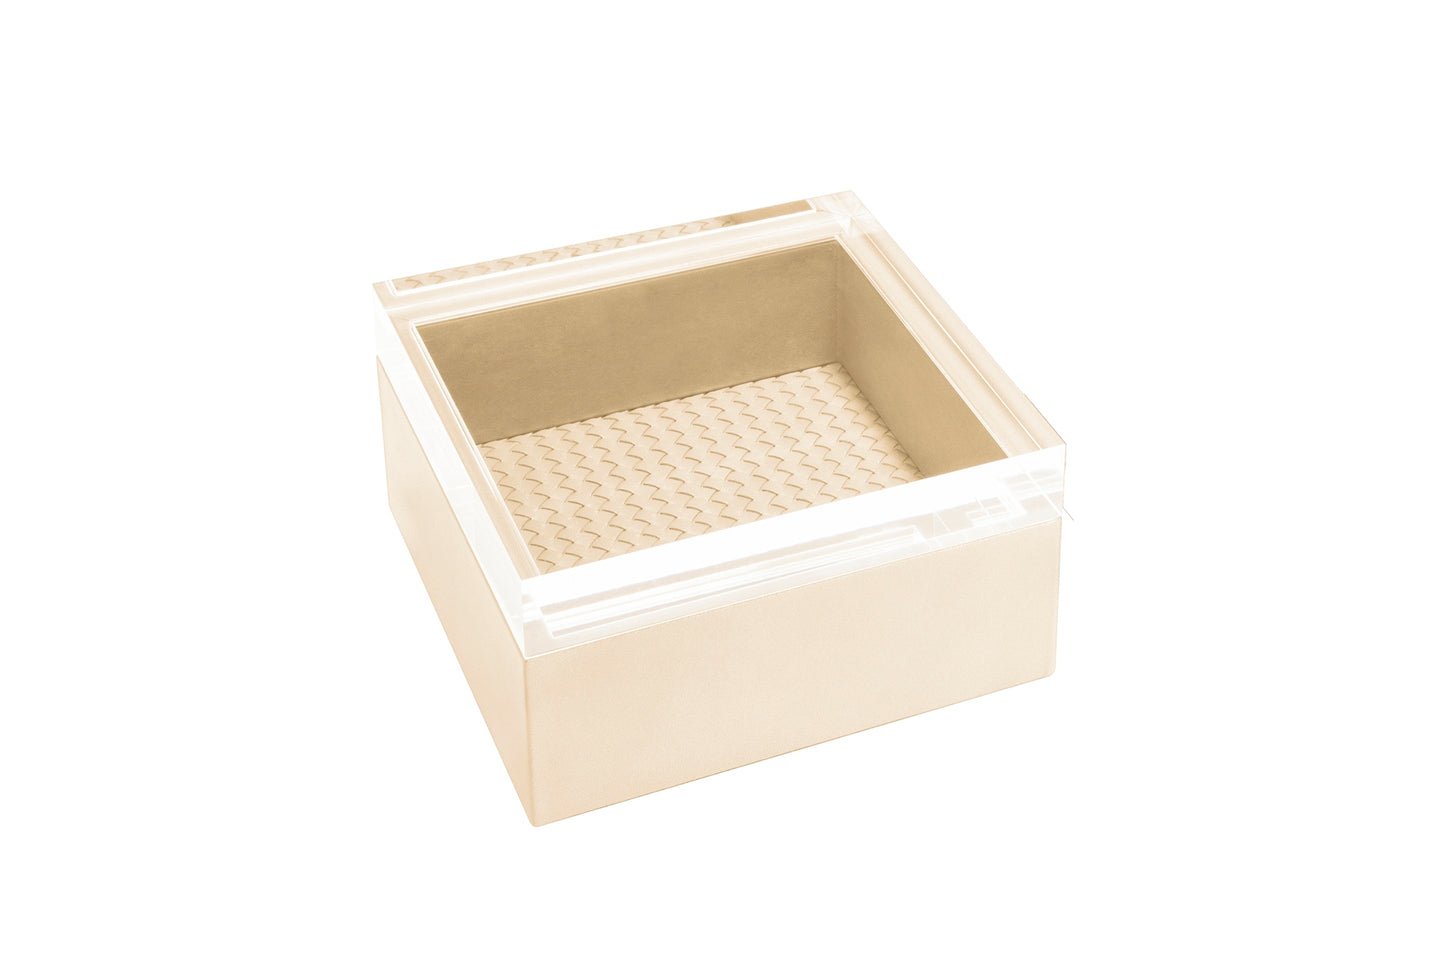 Febe Handwoven Box Square by Riviere | Leather box with acrylic lid and padded handwoven lining. | Home Decor and Storage | 2Jour Concierge, your luxury lifestyle shop